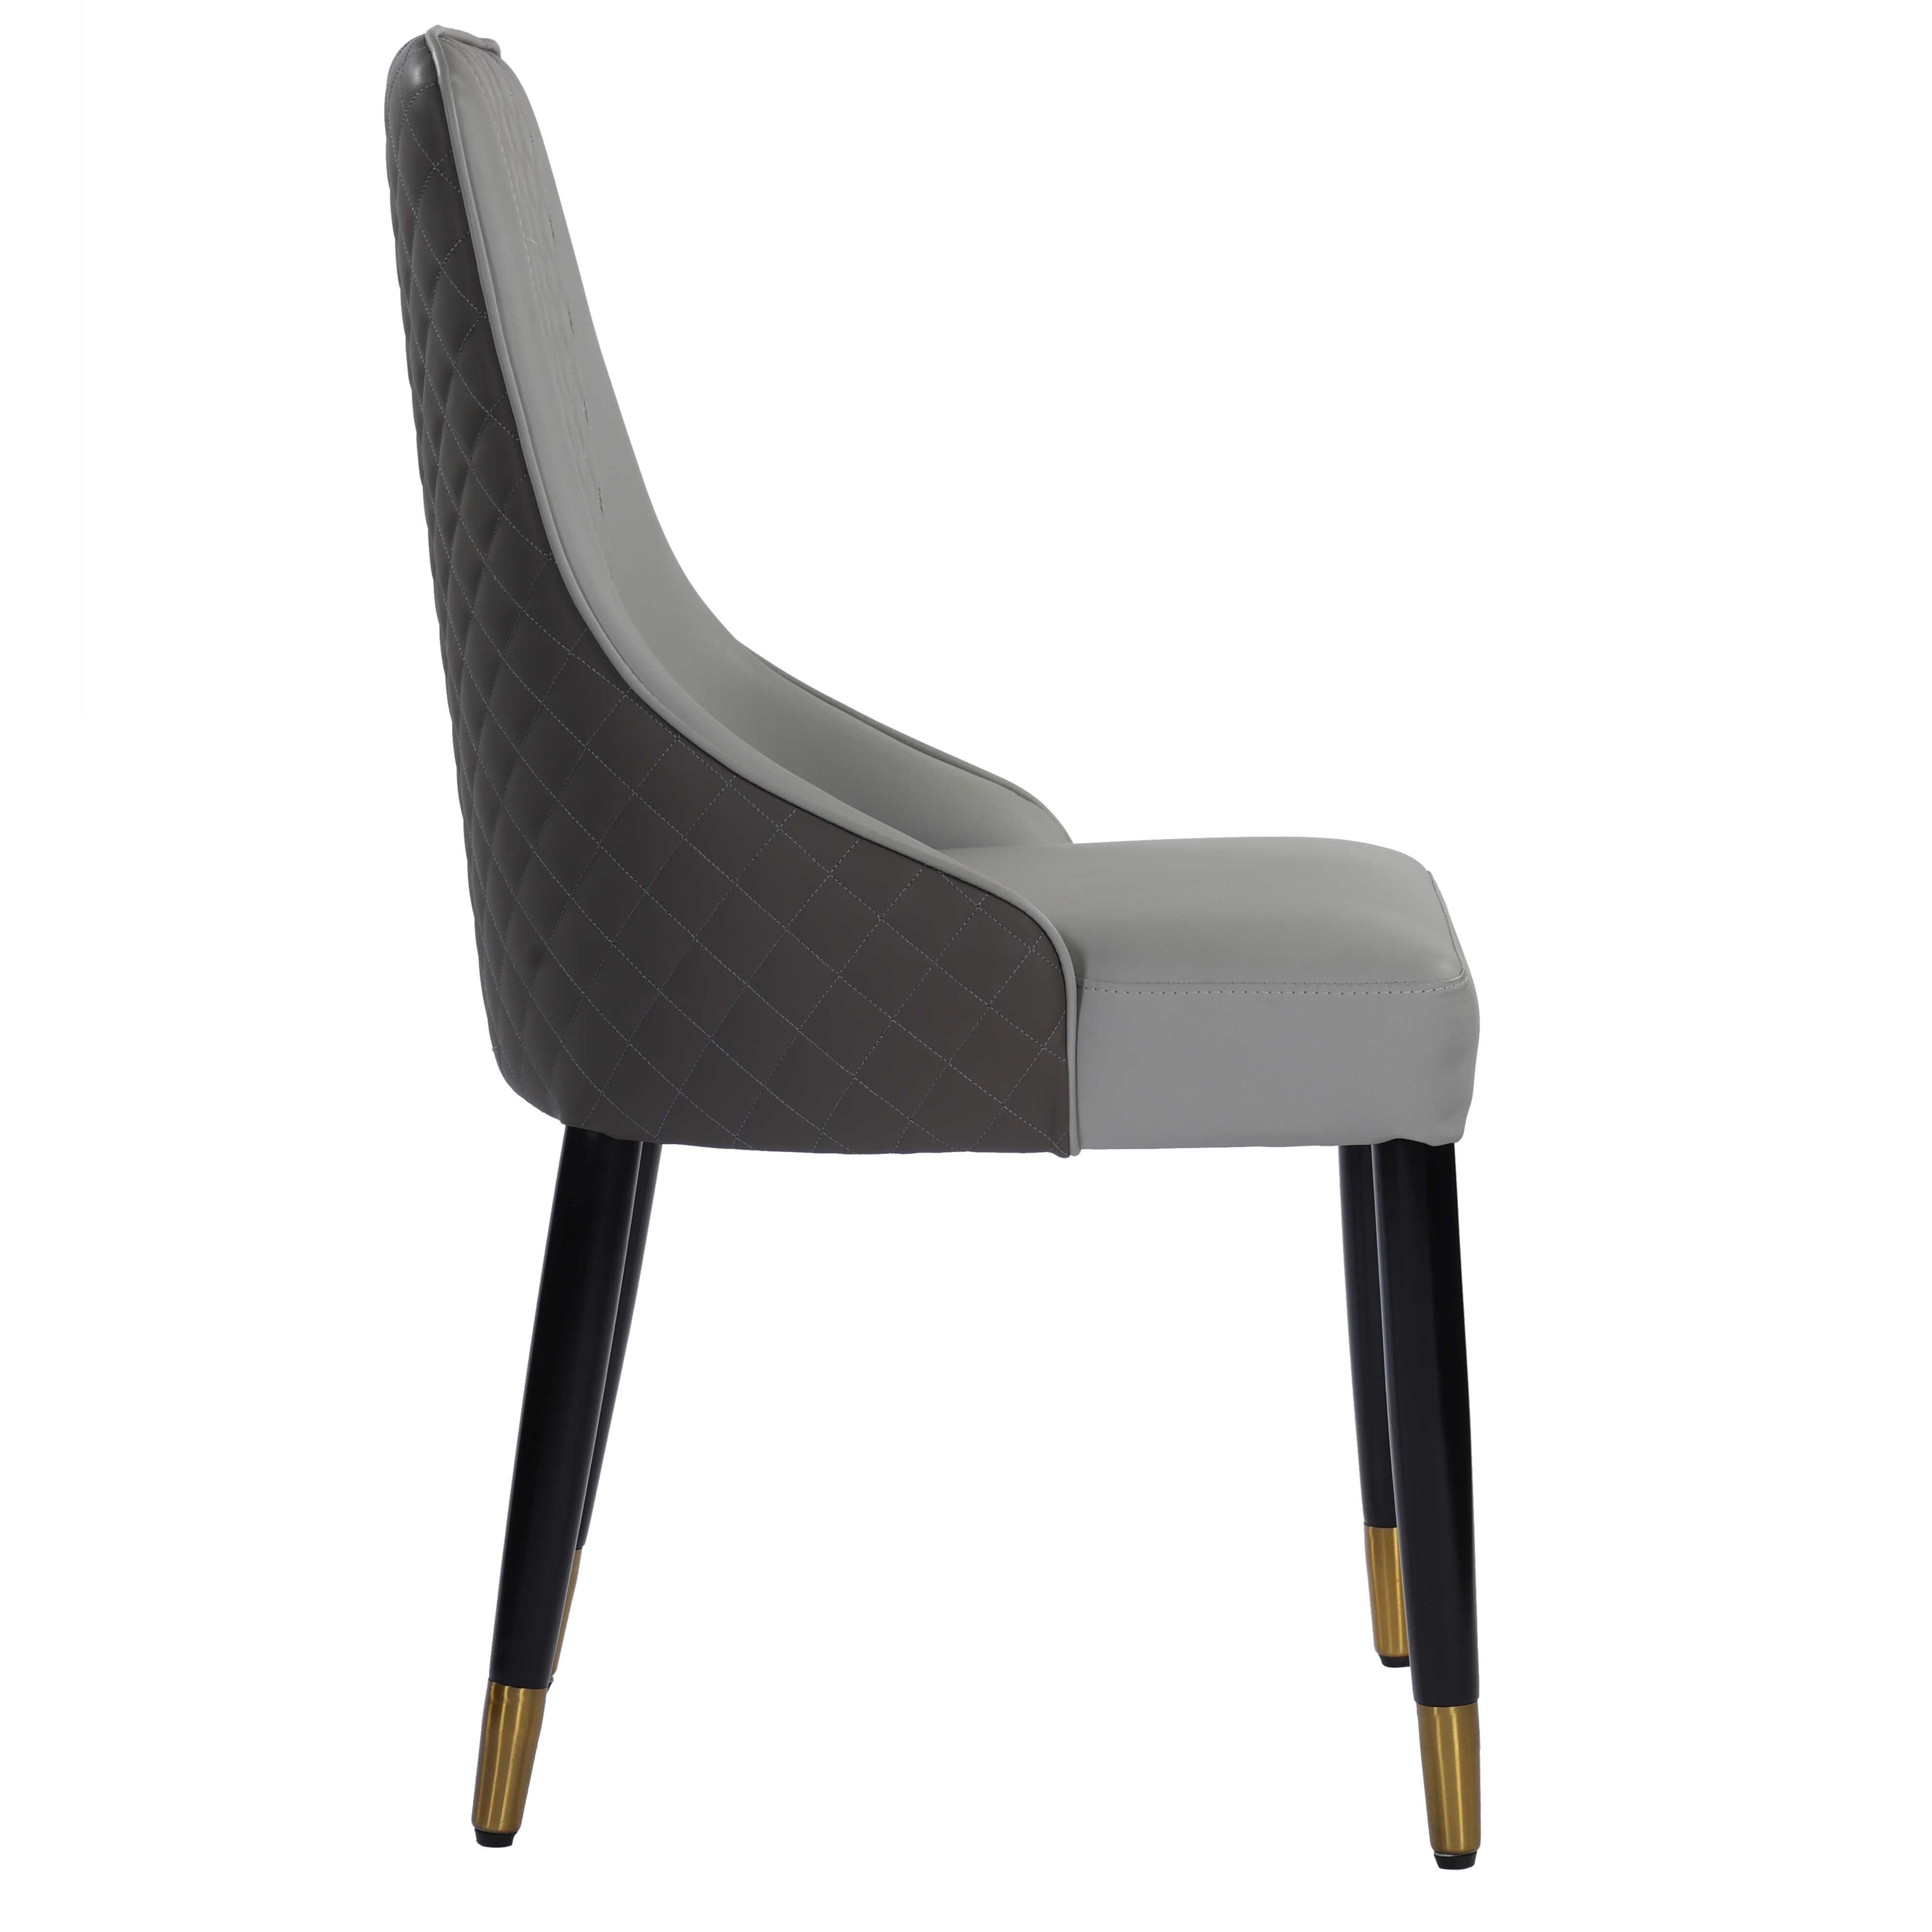 Elena Leather upholstered Dining chair with Gold Finish Metal Legs - Grey